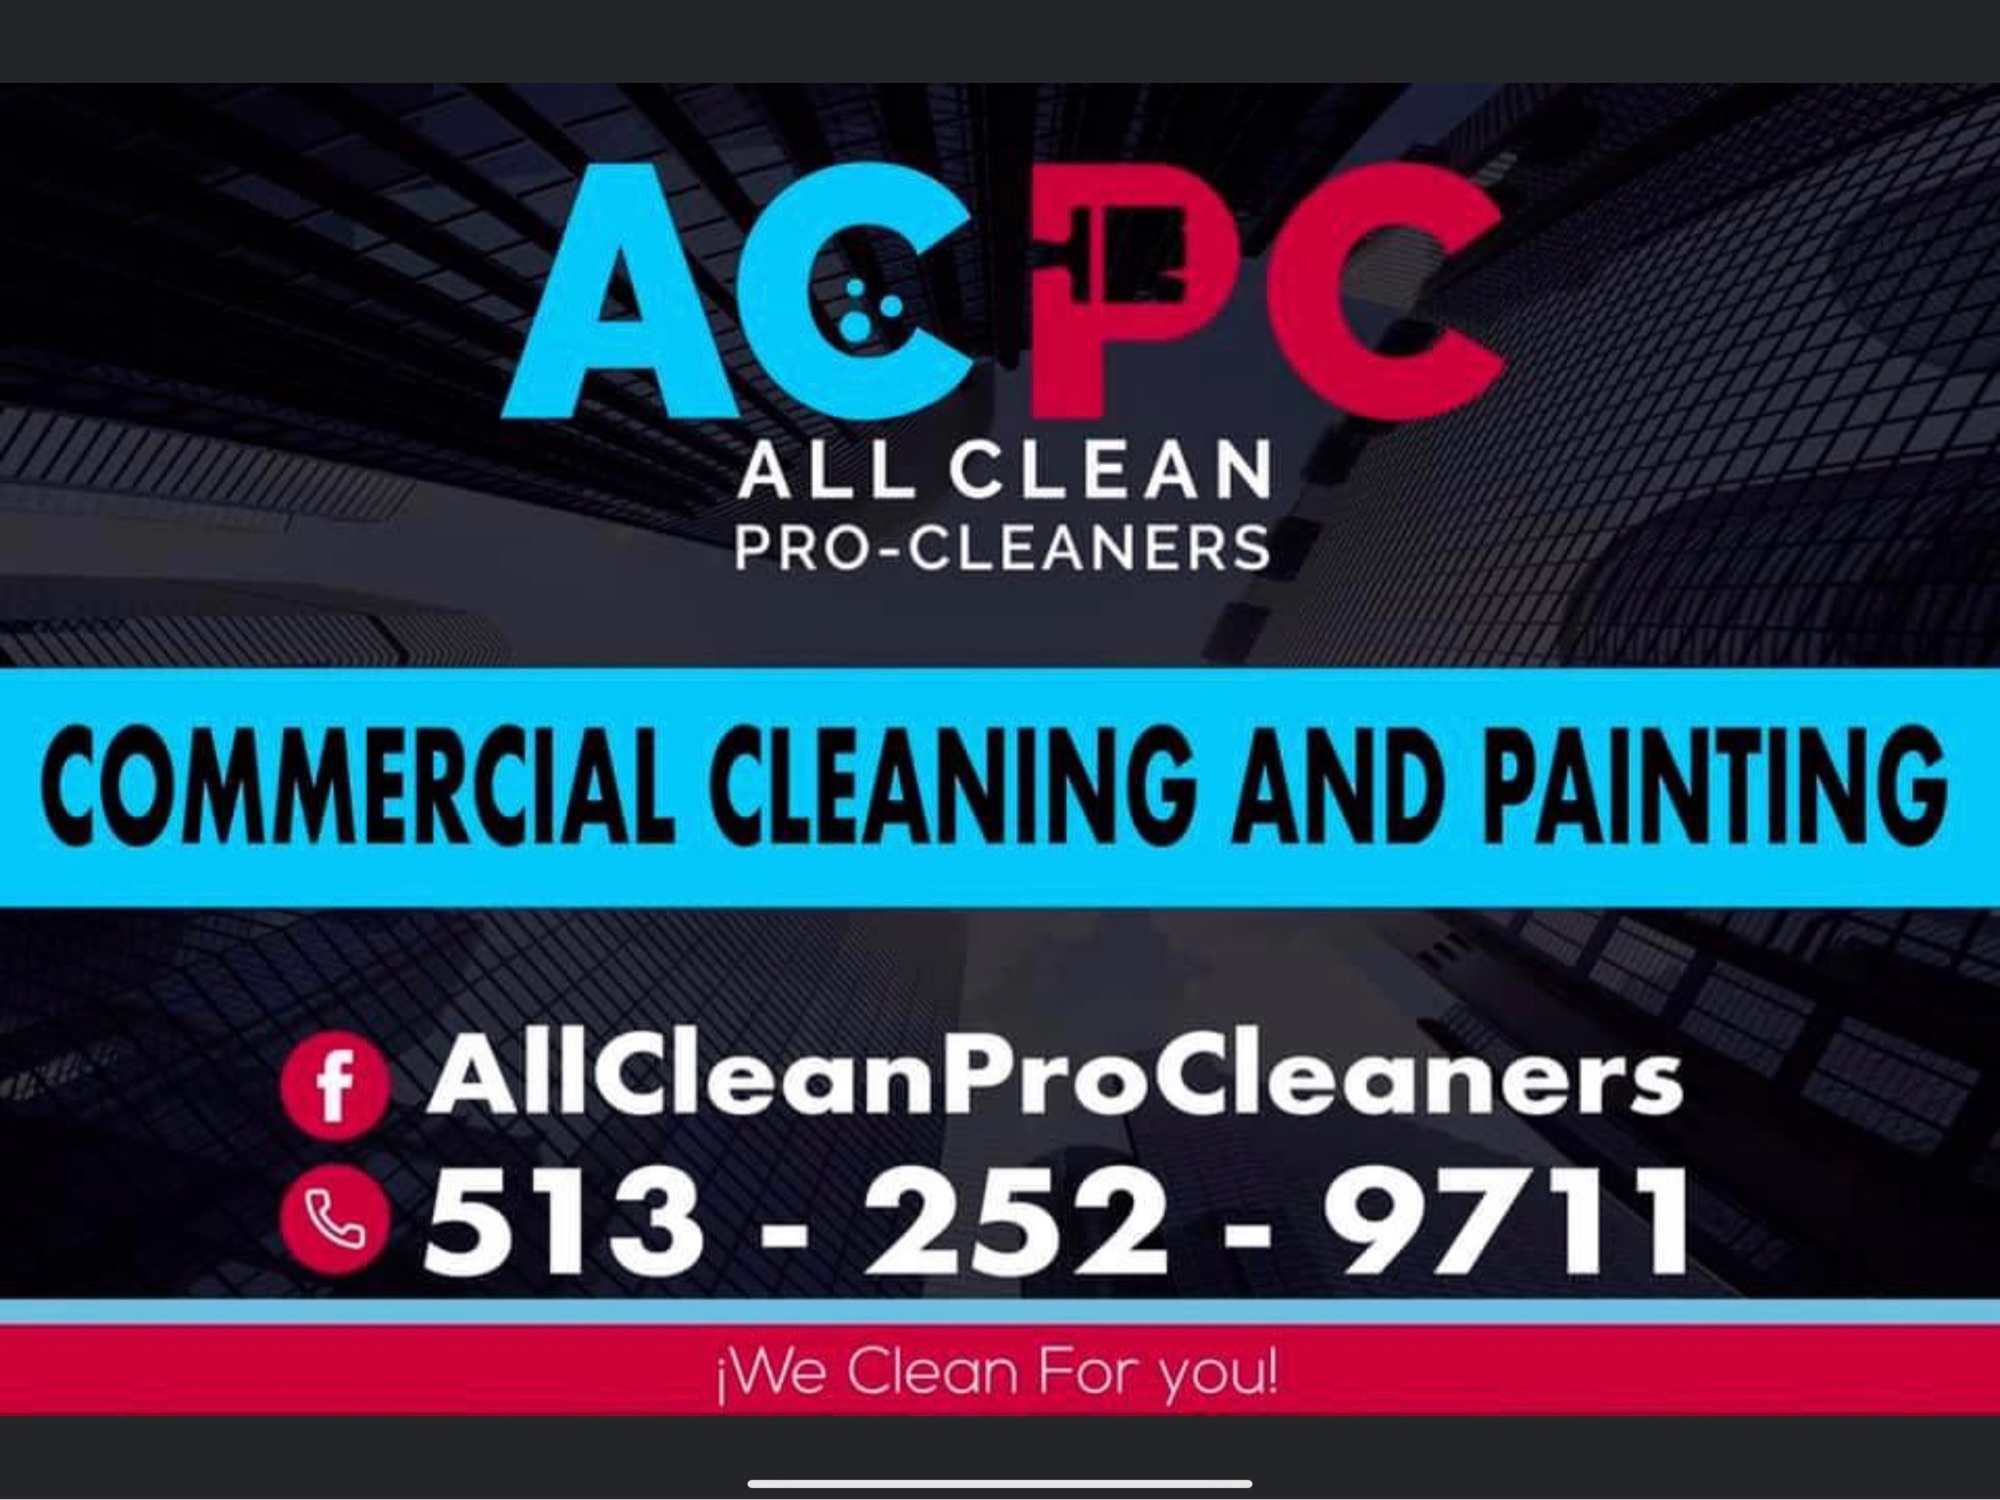 All Clean Pro-Cleaners Logo